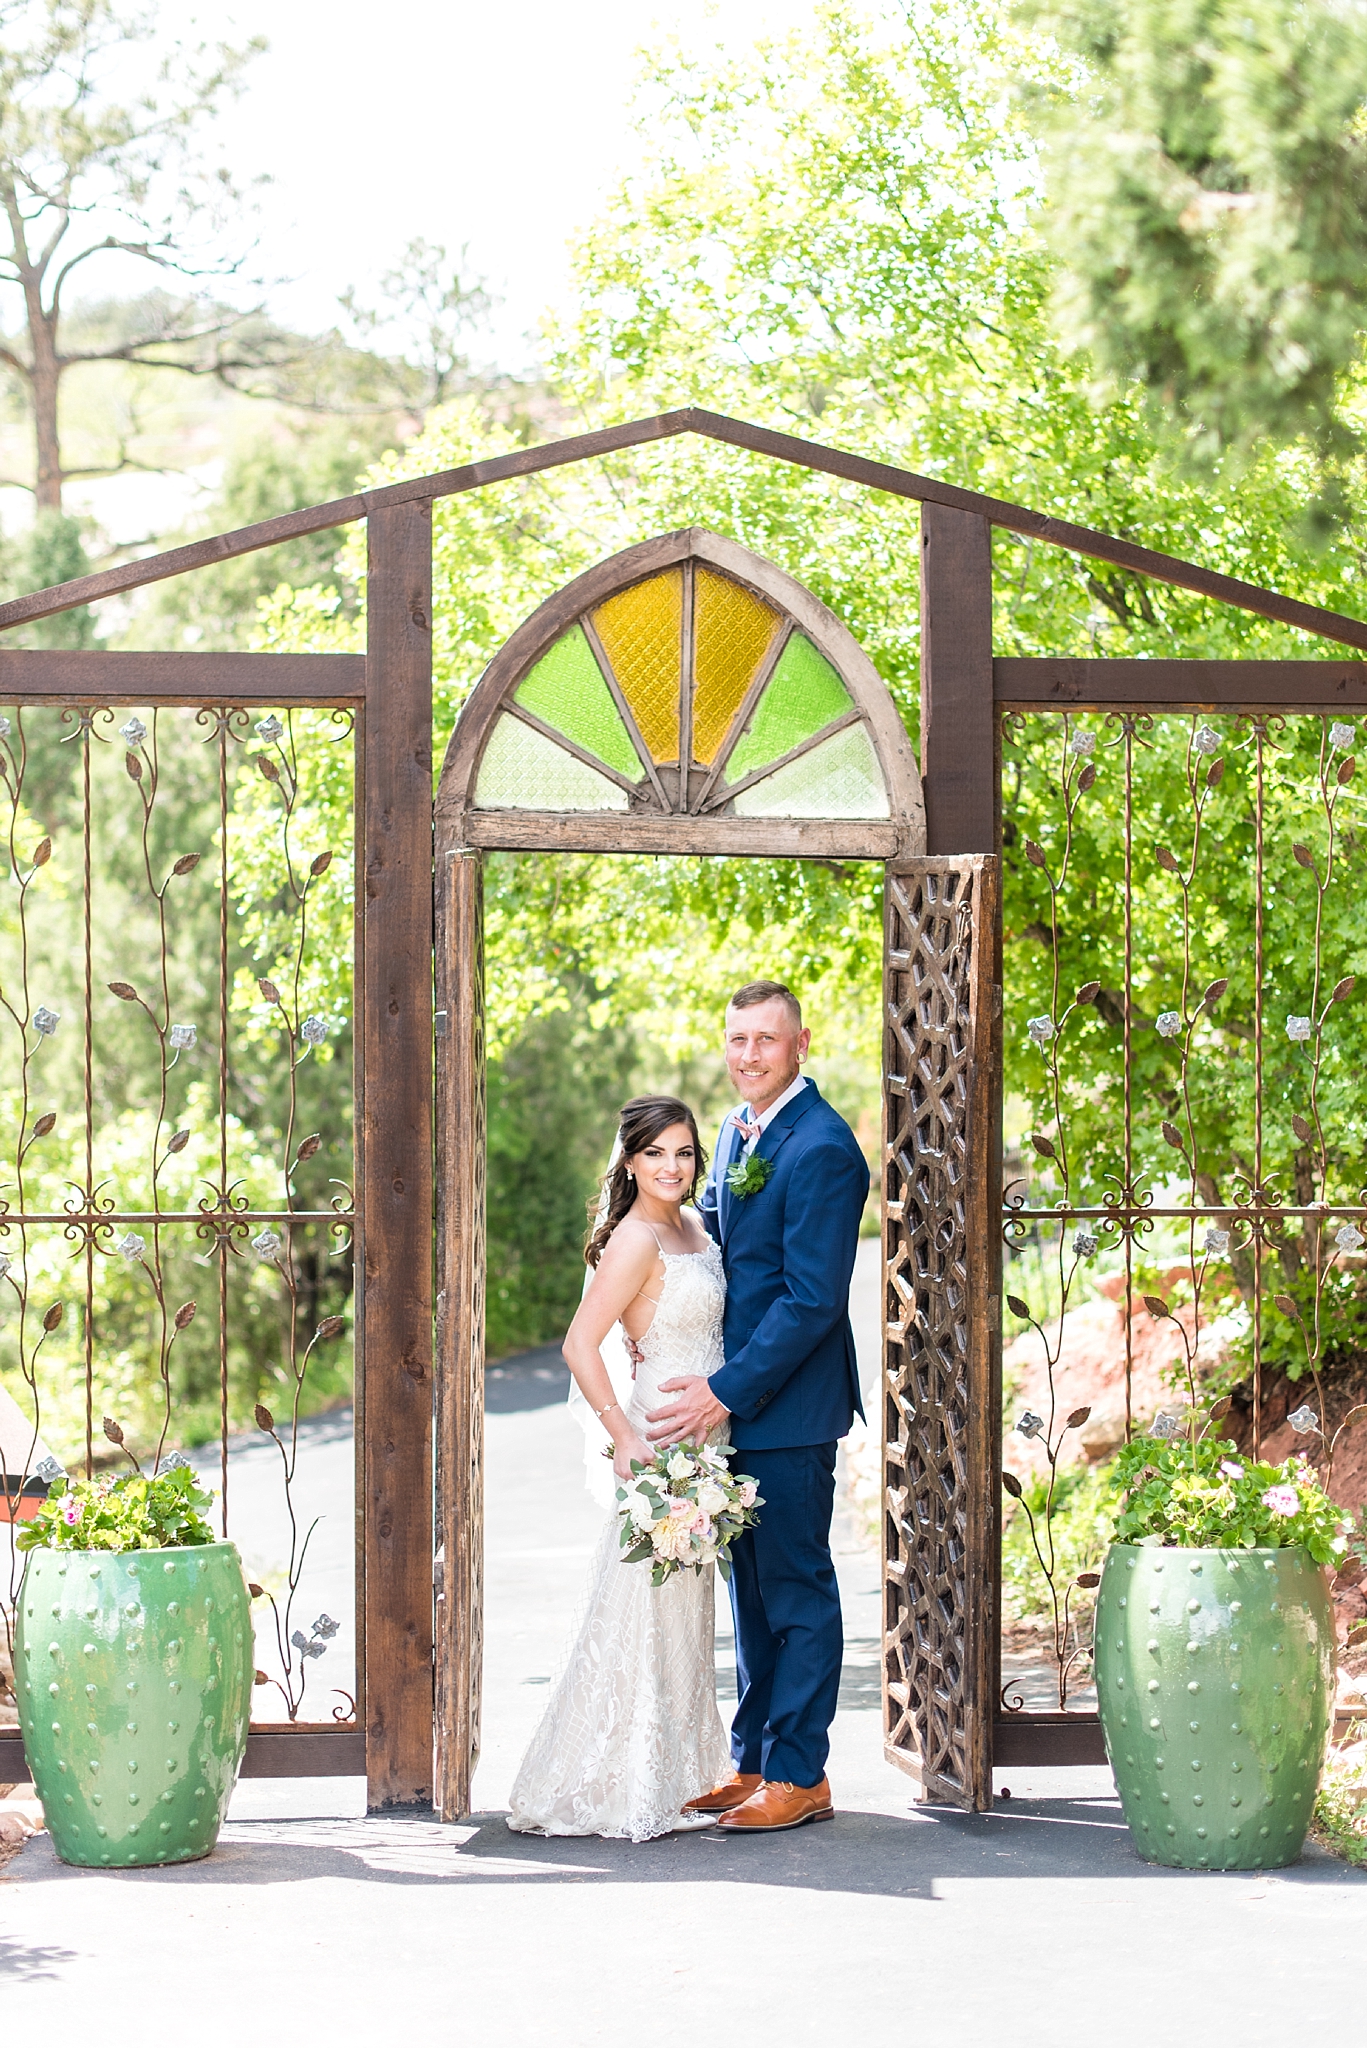 bride and groom standing in a doorway with green and yellow stained gladd over them and wrought iron bars on either side. bride and groom are looking and smiling at the camera. groom is wearing a blue suit and the bride is wearing a white dress and holding a bouquet with white and pink flowers